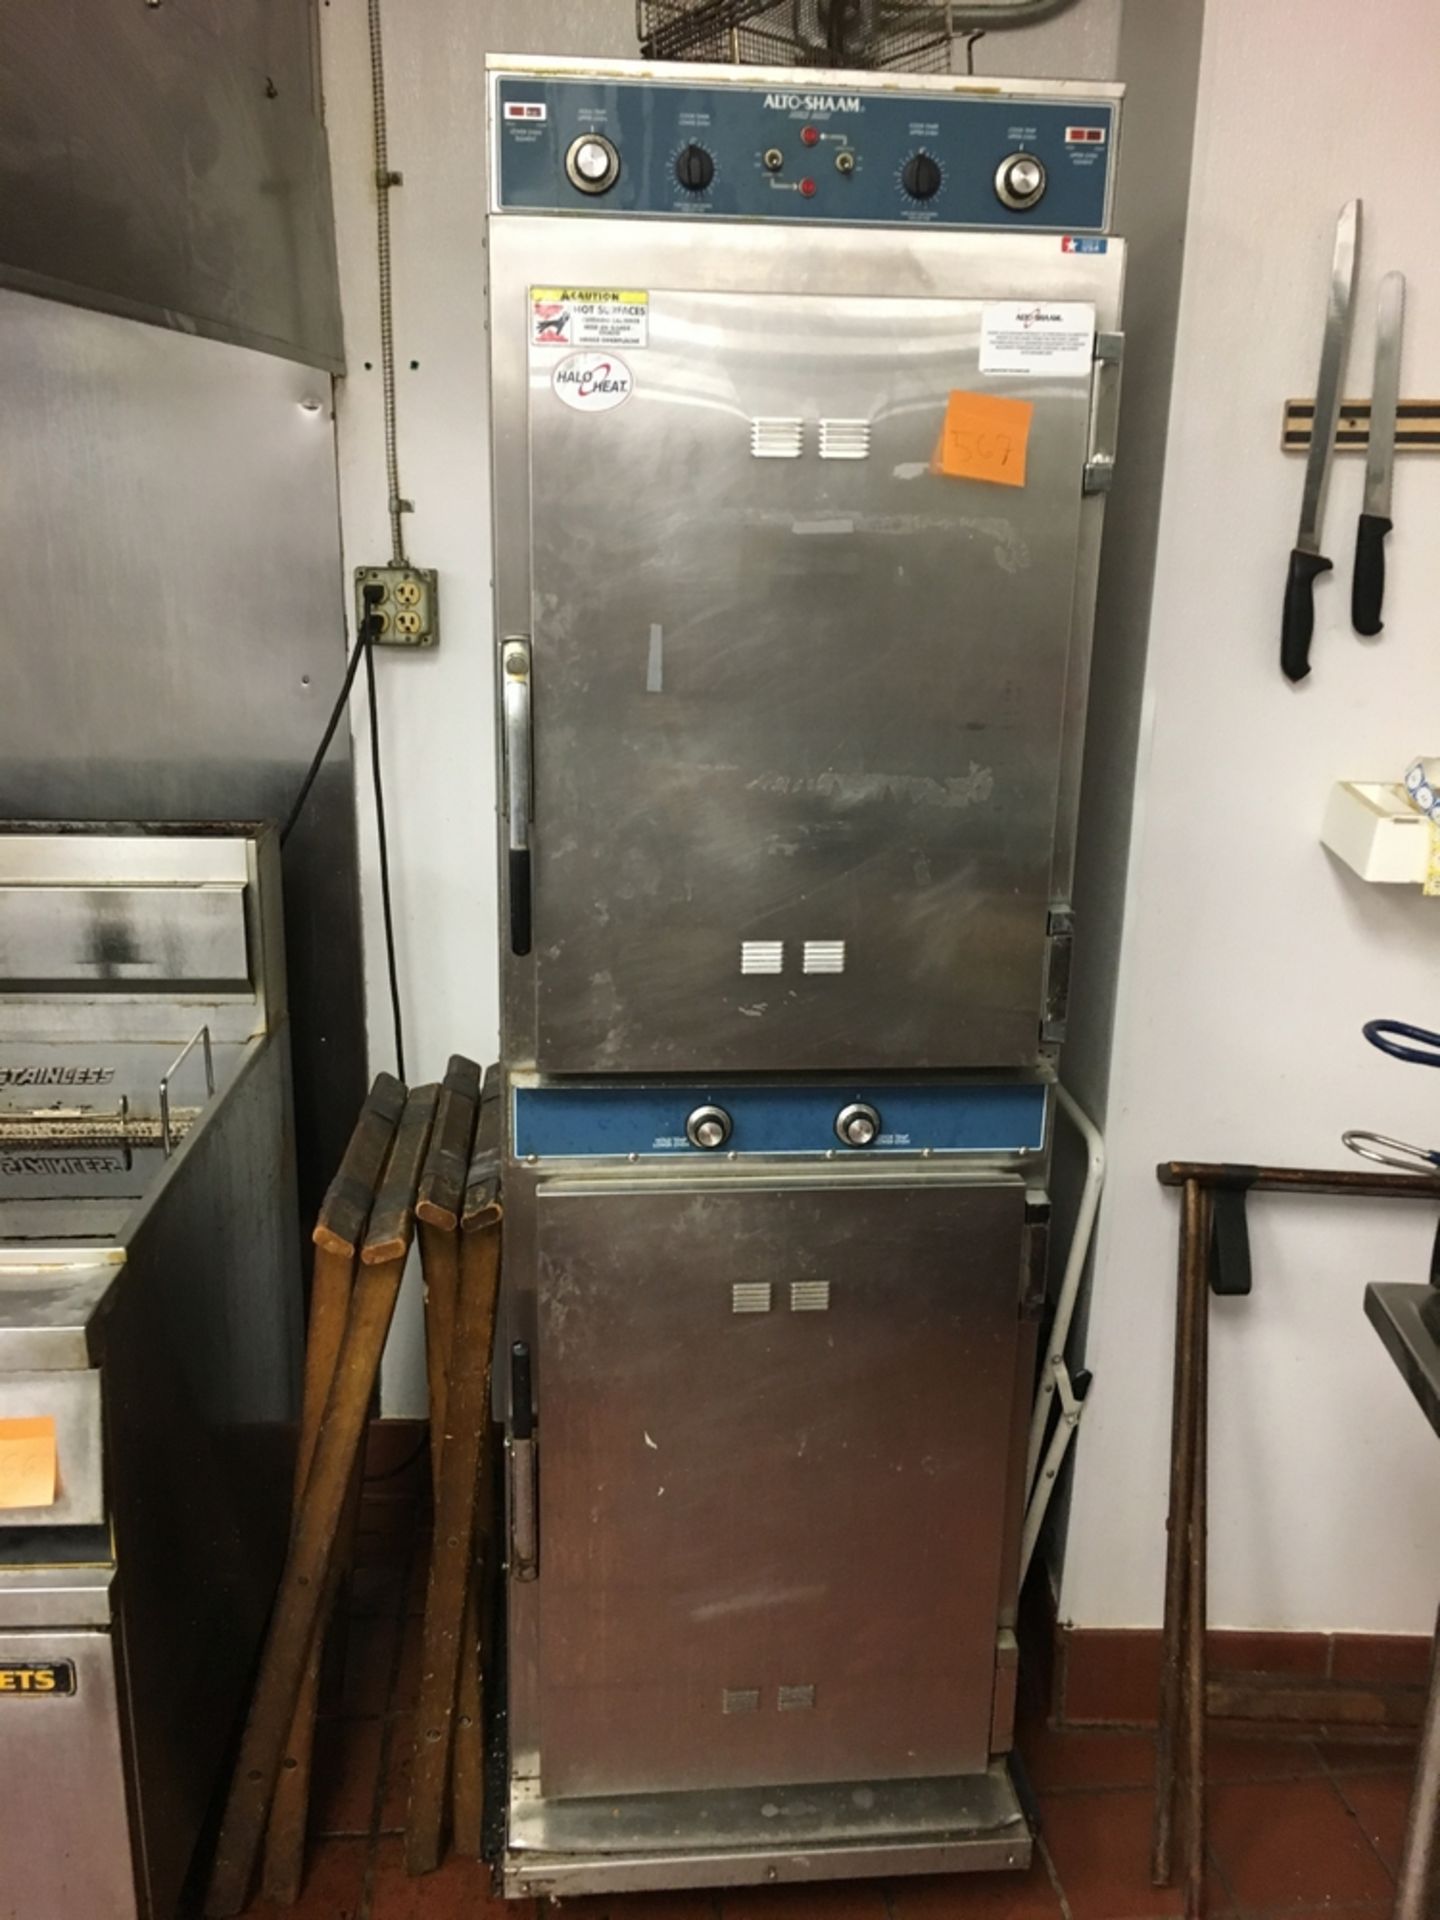 SS Oven, Auto-Shaam, 2 x 3 1/2 x 6 1/2 ft Located: Main Kitchen, adjacent to Palace Grill Asset #: